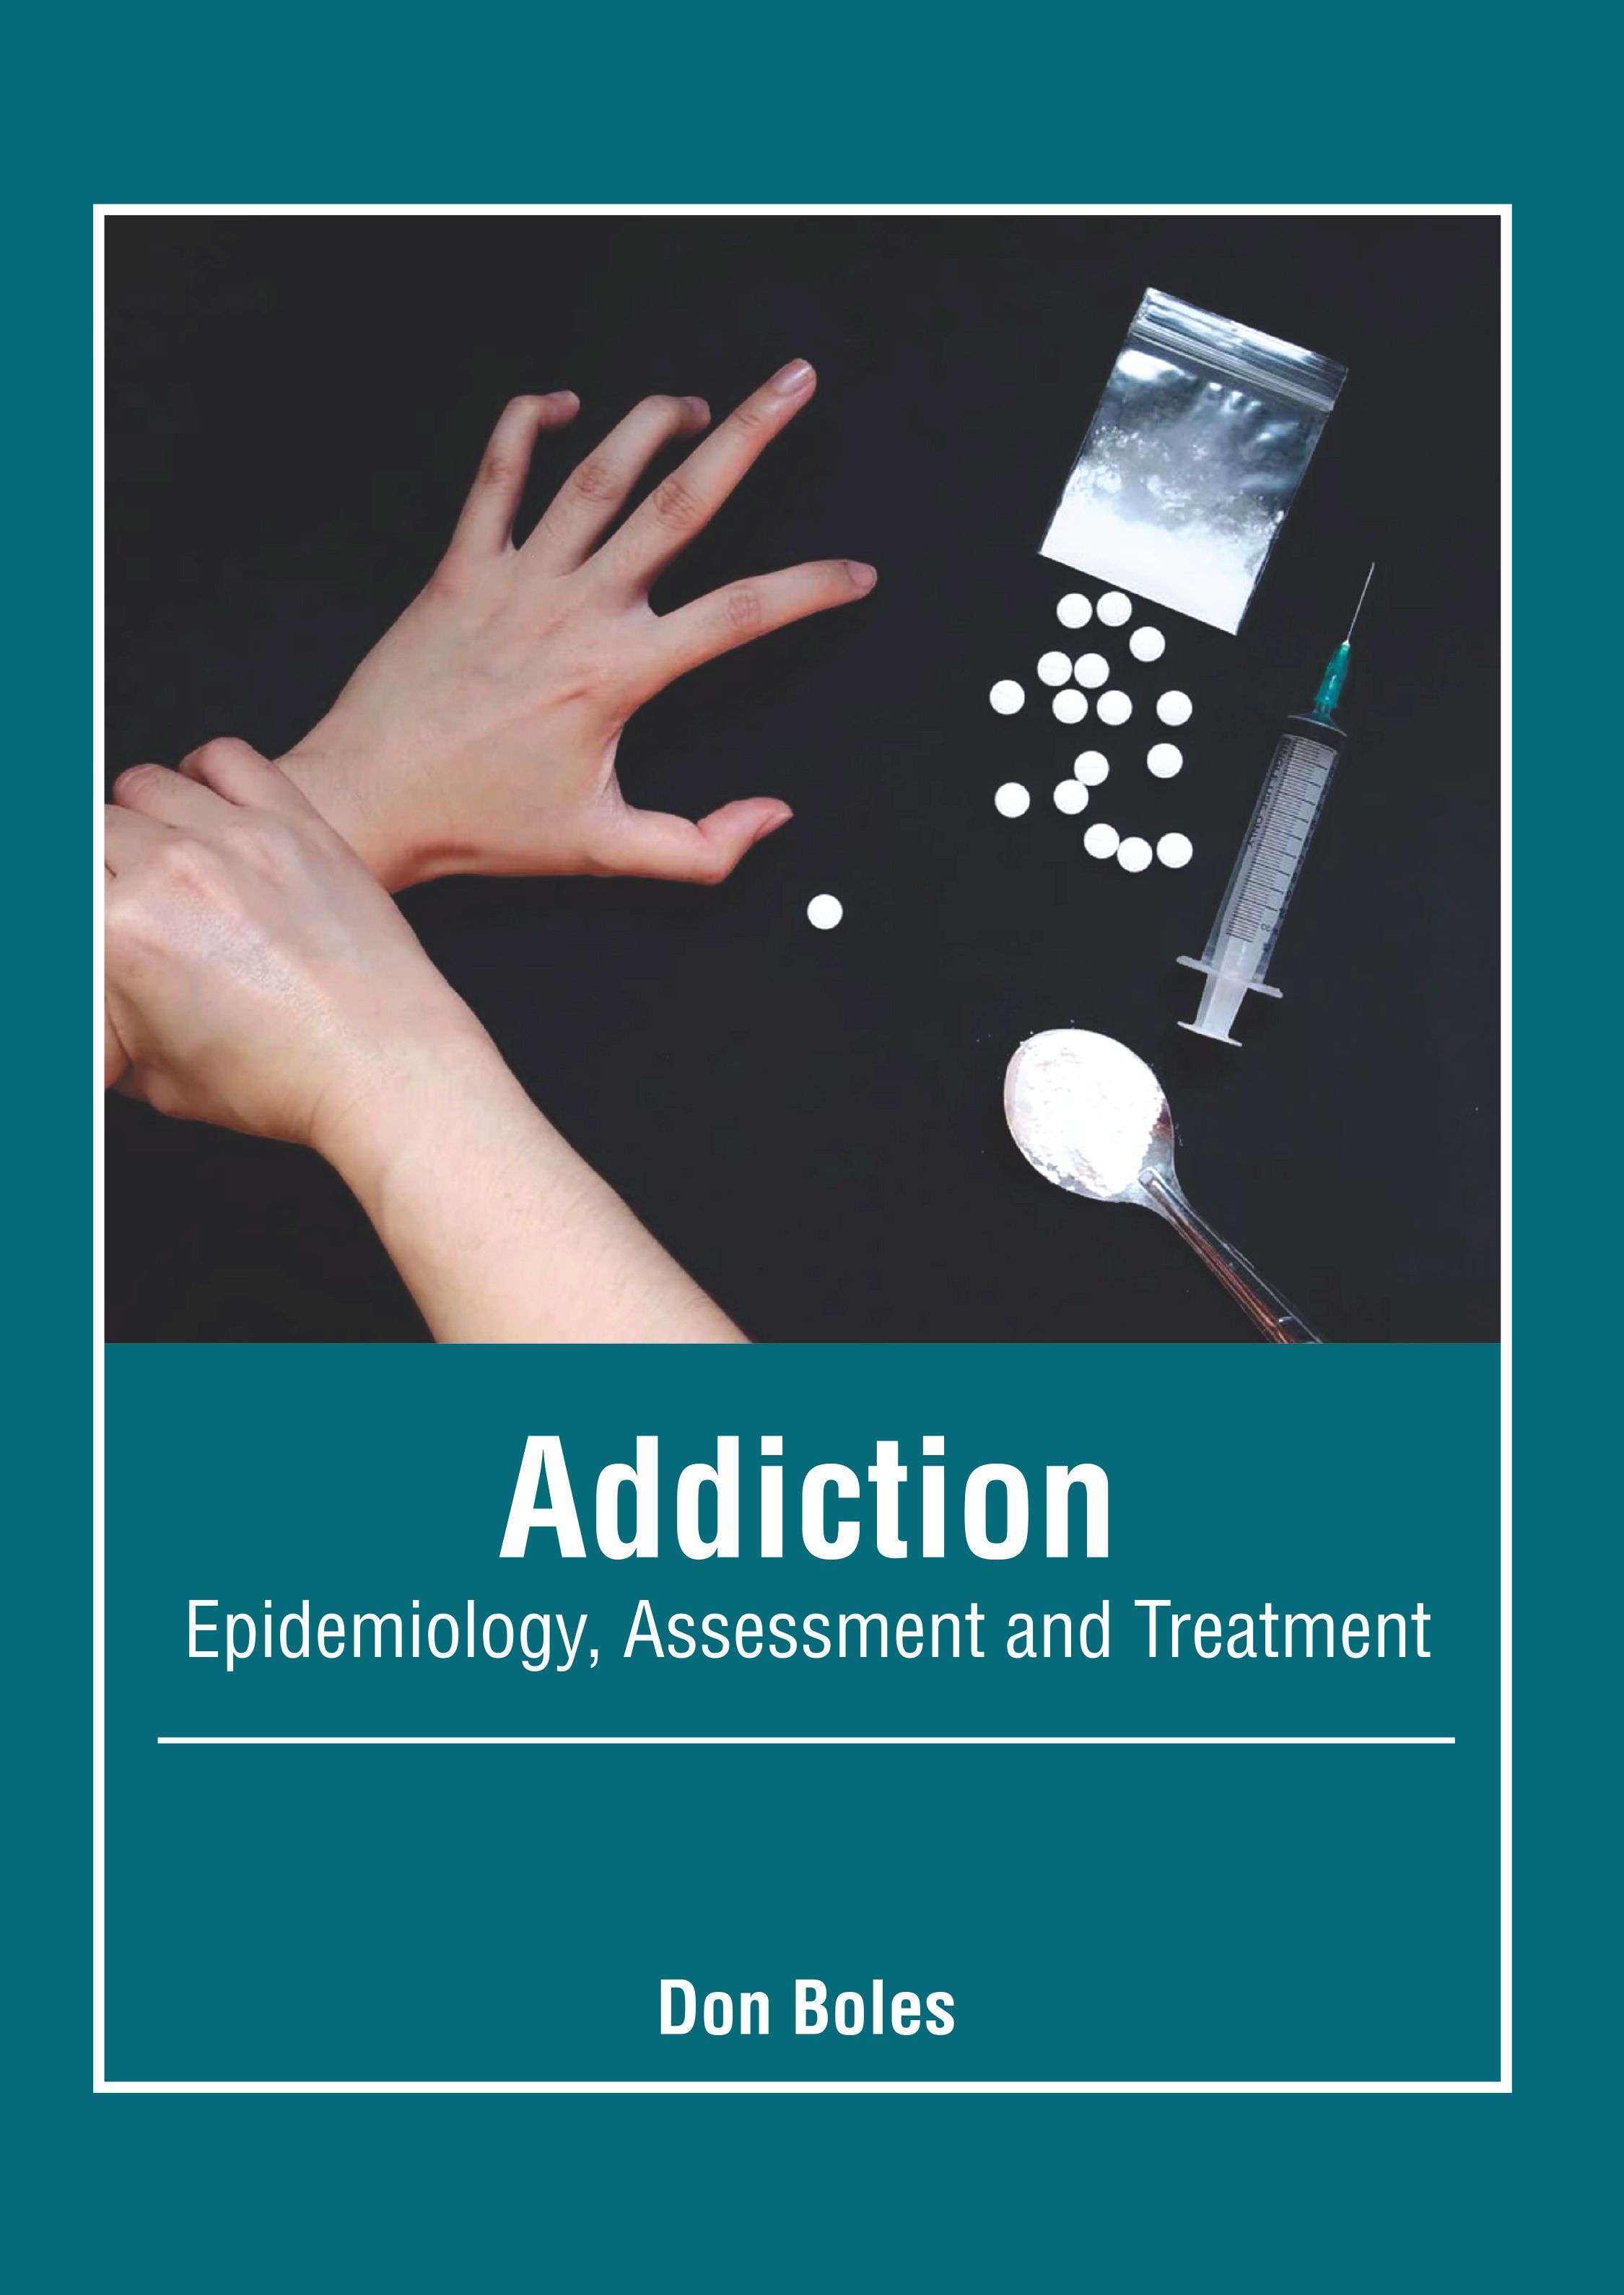 

exclusive-publishers/american-medical-publishers/addiction-epidemiology-assessment-and-treatment-9781639278510